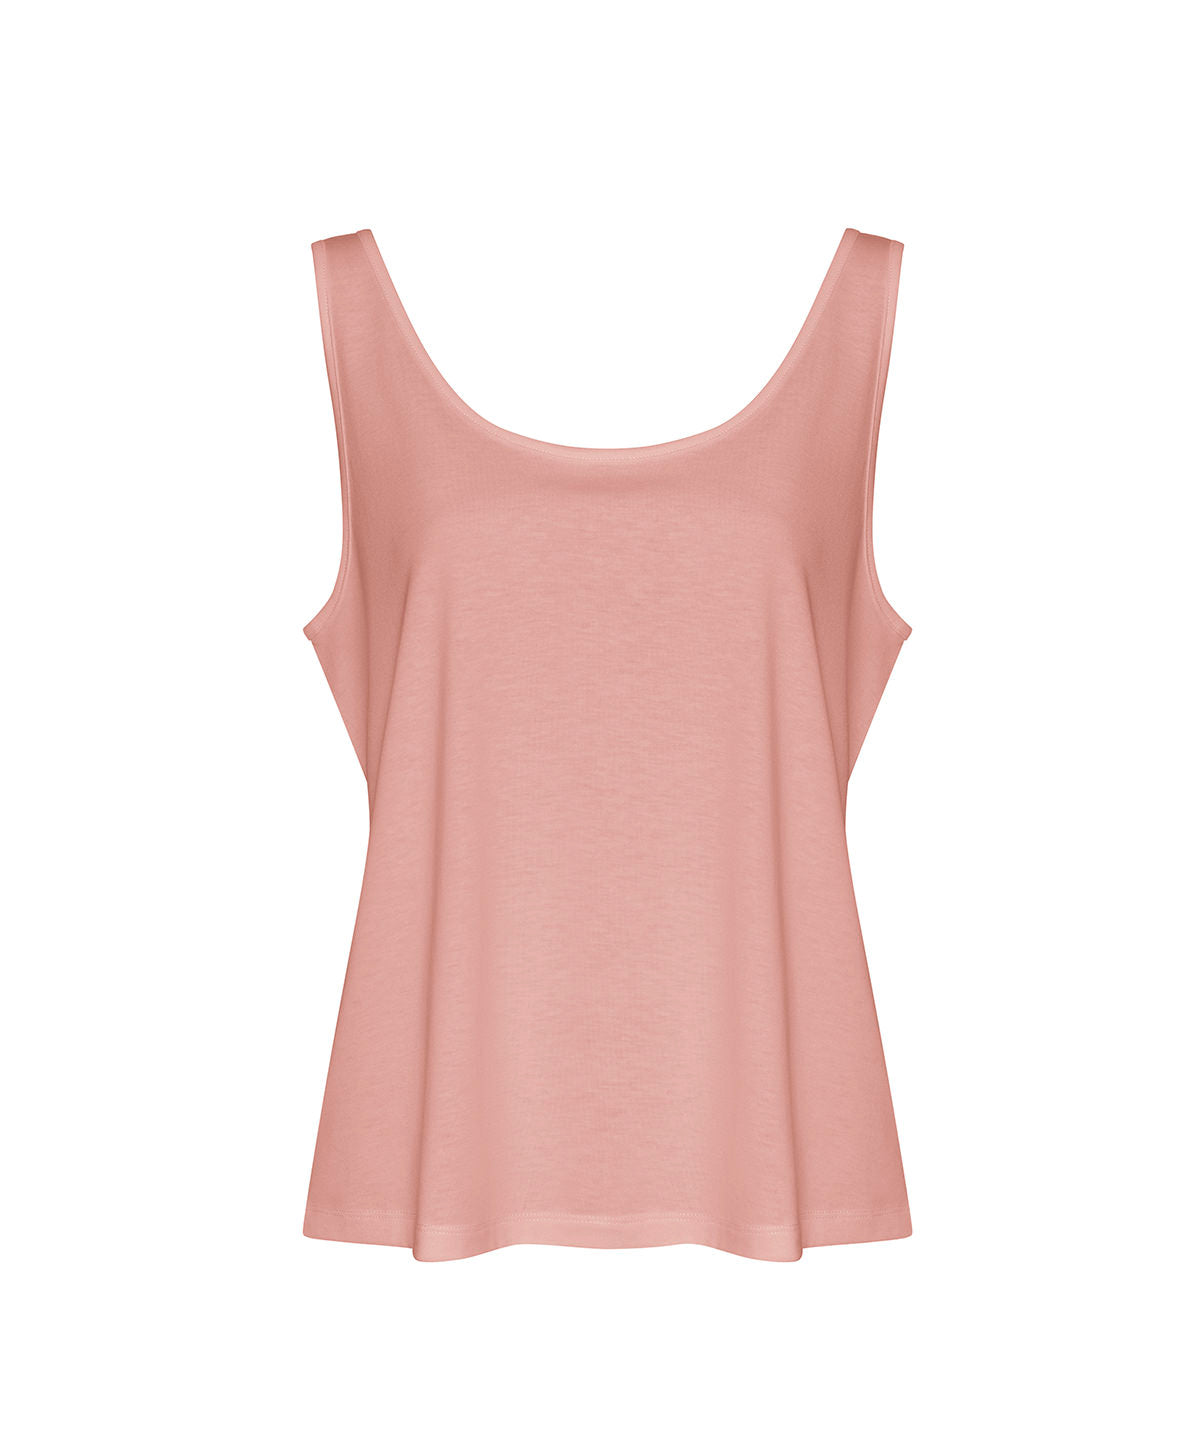 Personalised Vests - Light Pink AWDis Just T's Women’s tank top